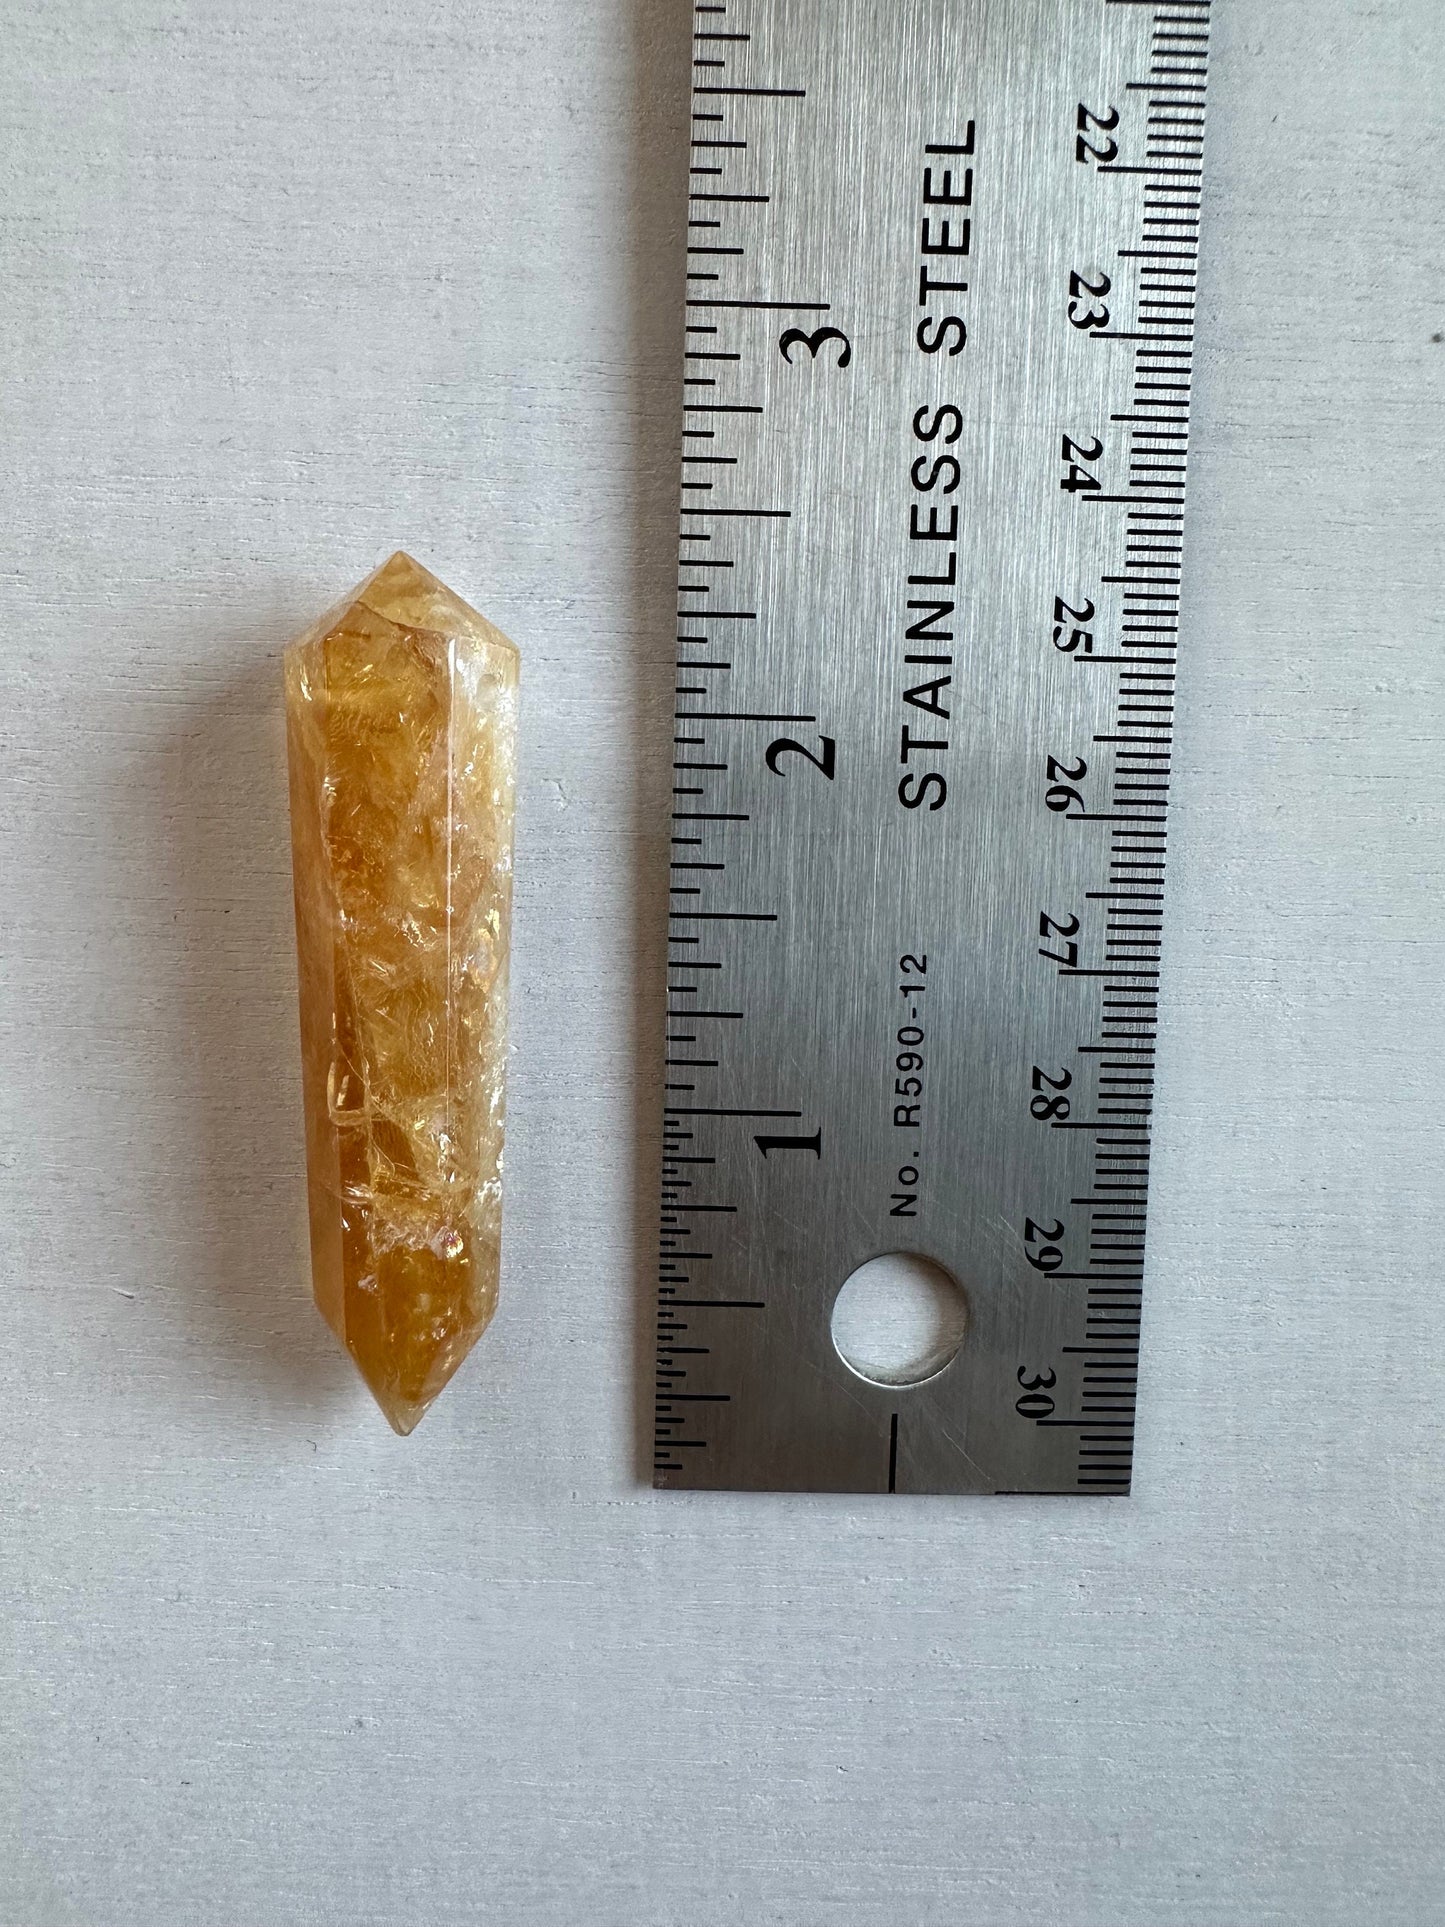 Golden Rutile Point Necklace | Crystal Gemstone Tower Pendant | Double Terminated Crystal | Rutile Quartz Jewelry